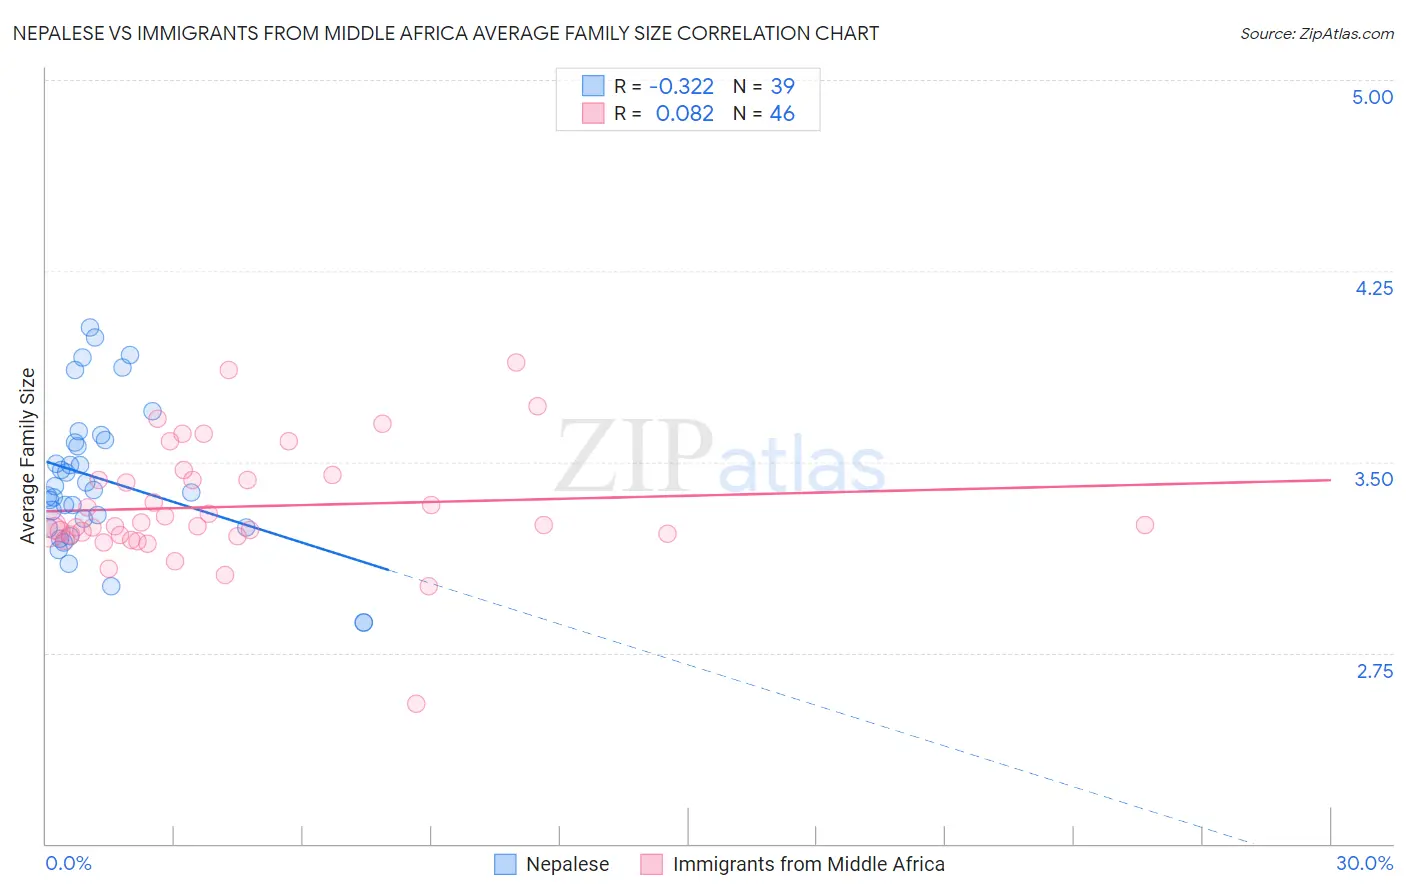 Nepalese vs Immigrants from Middle Africa Average Family Size